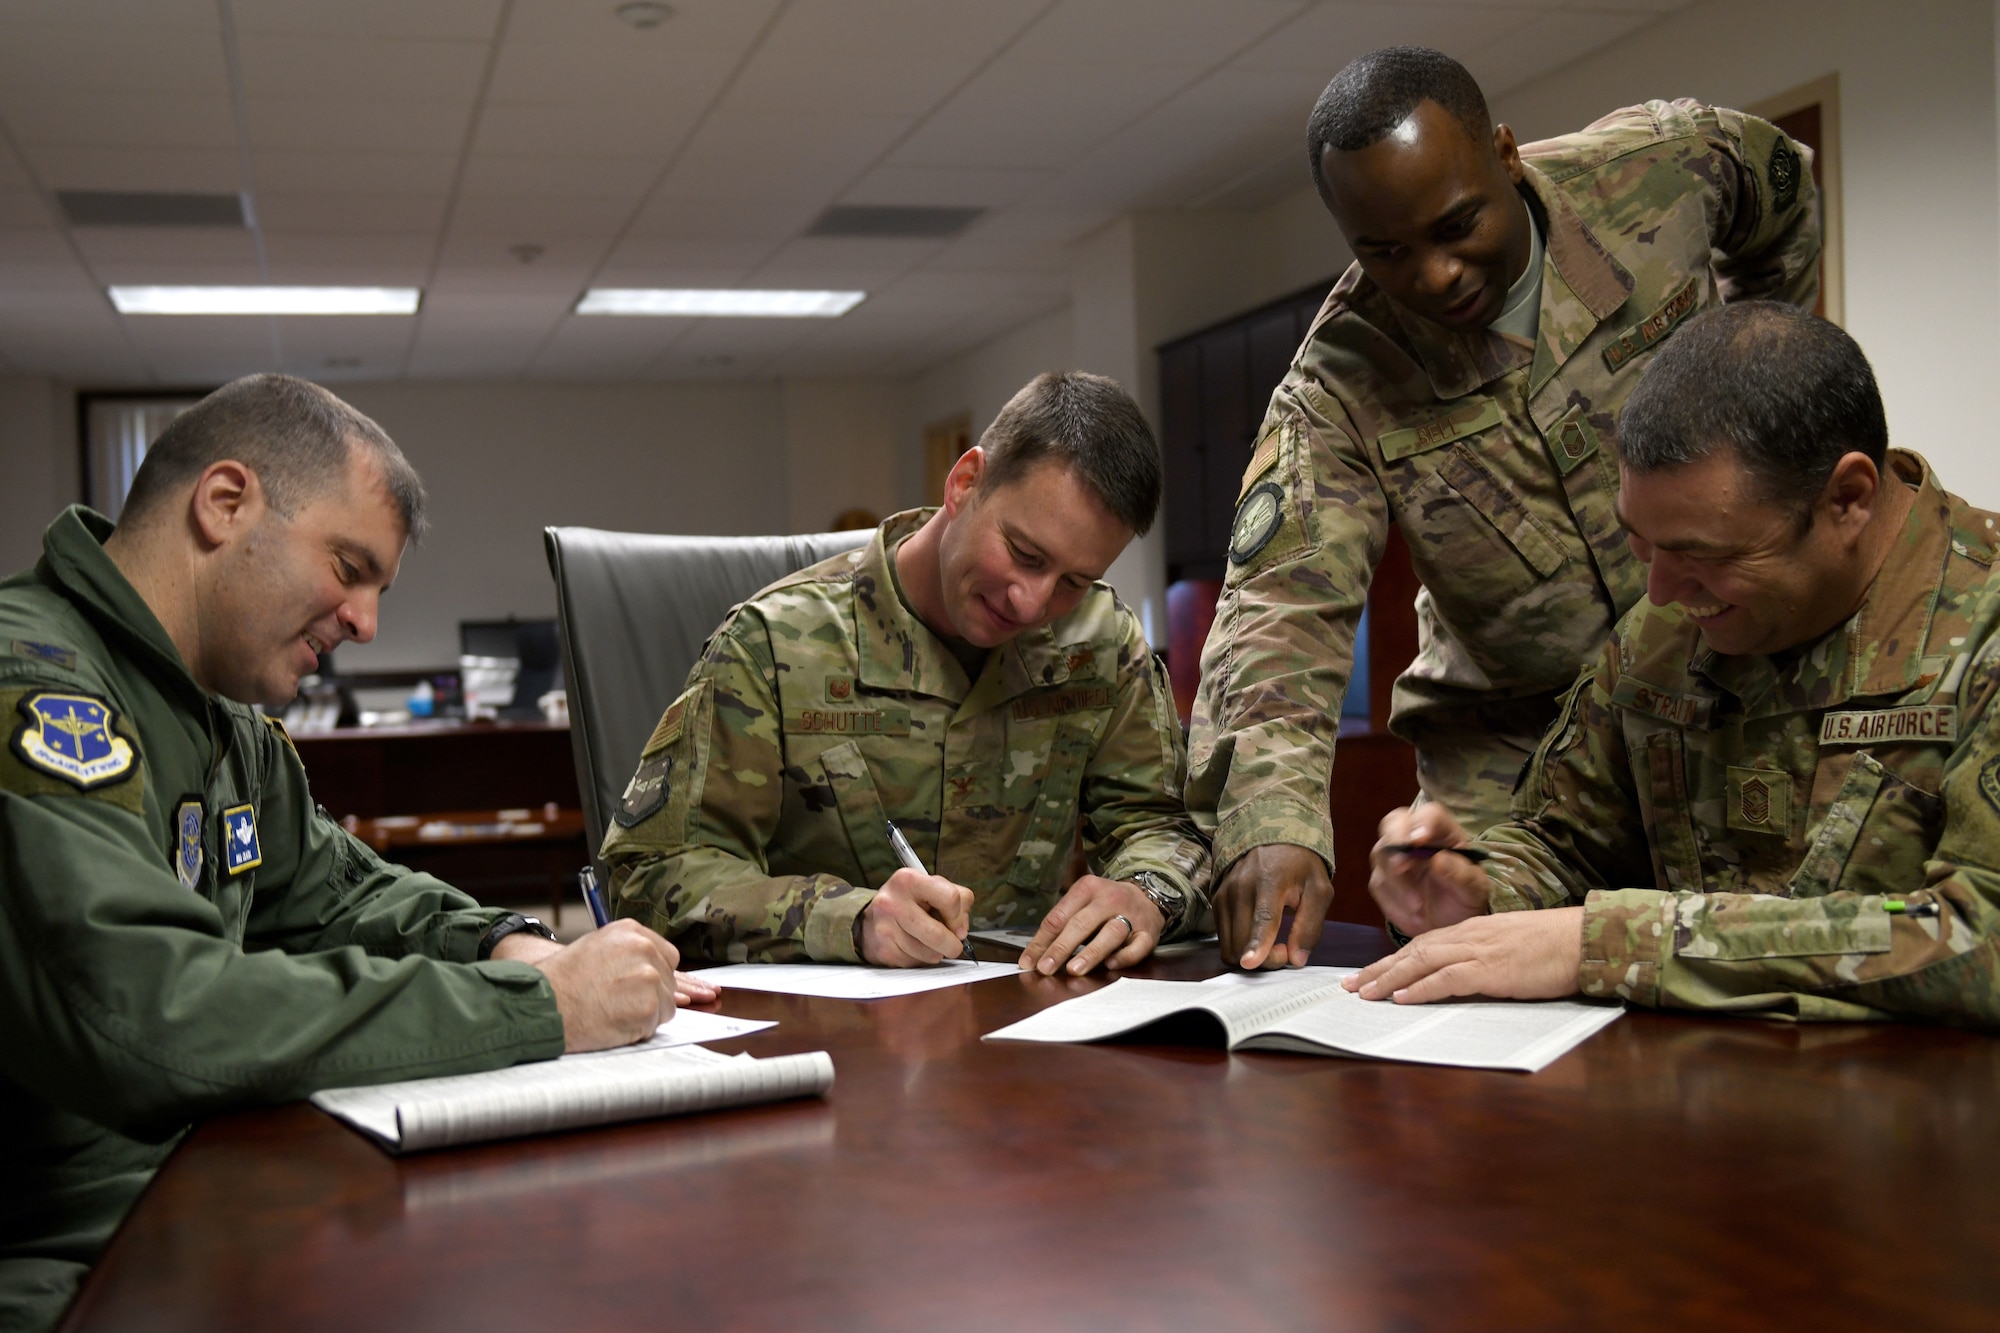 Men in military uniforms sign a piece of paper.